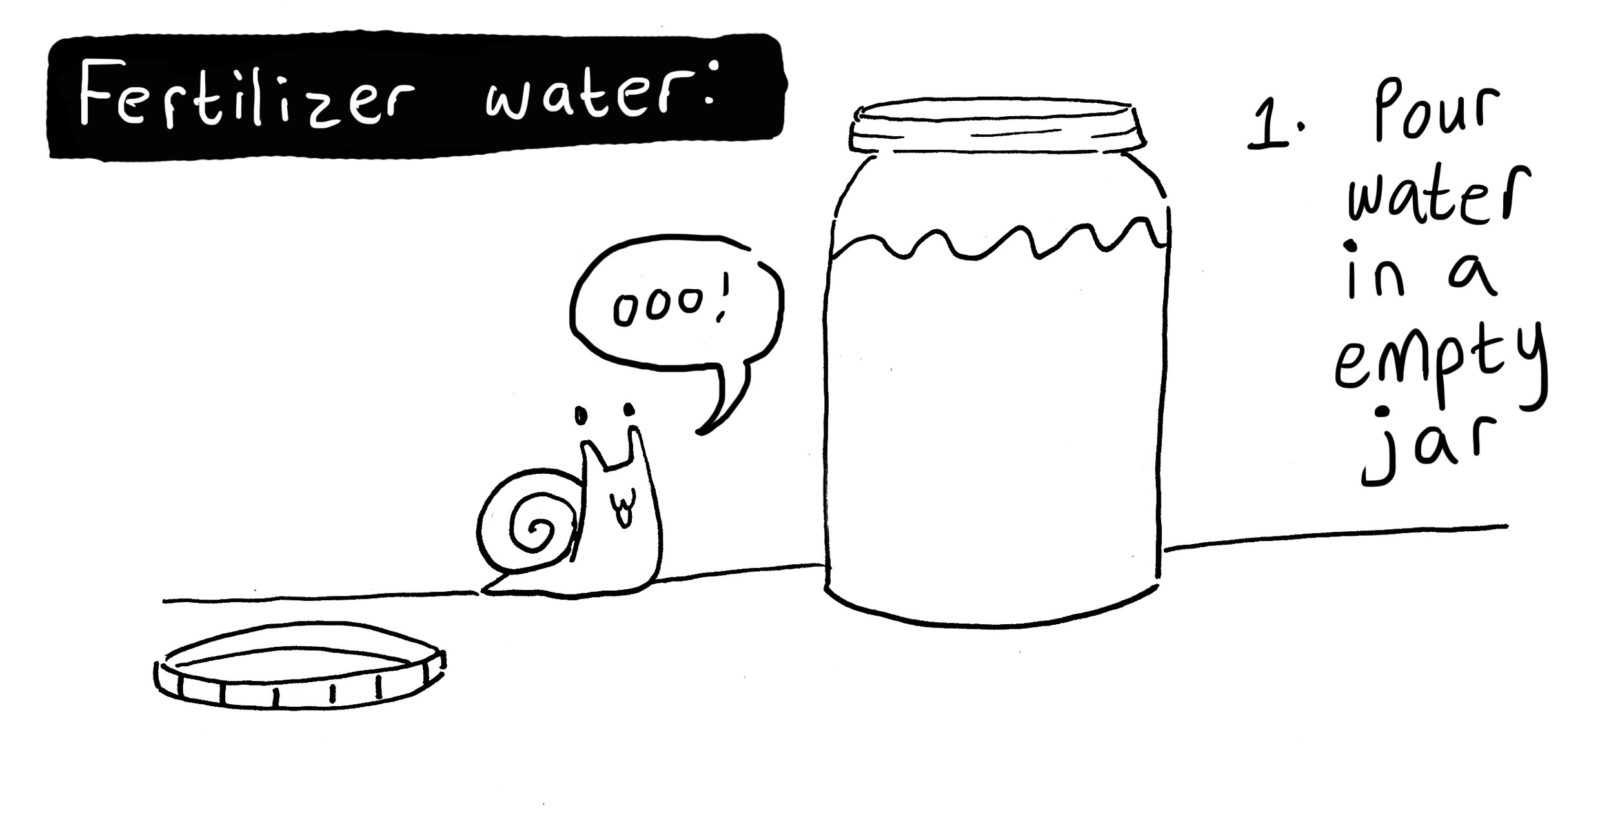 Illustration with text reading: 'Fertilizer water', '1. Pour water into empty jar', with an illustration of a snail saying 'ooo!'  and a jar of water.